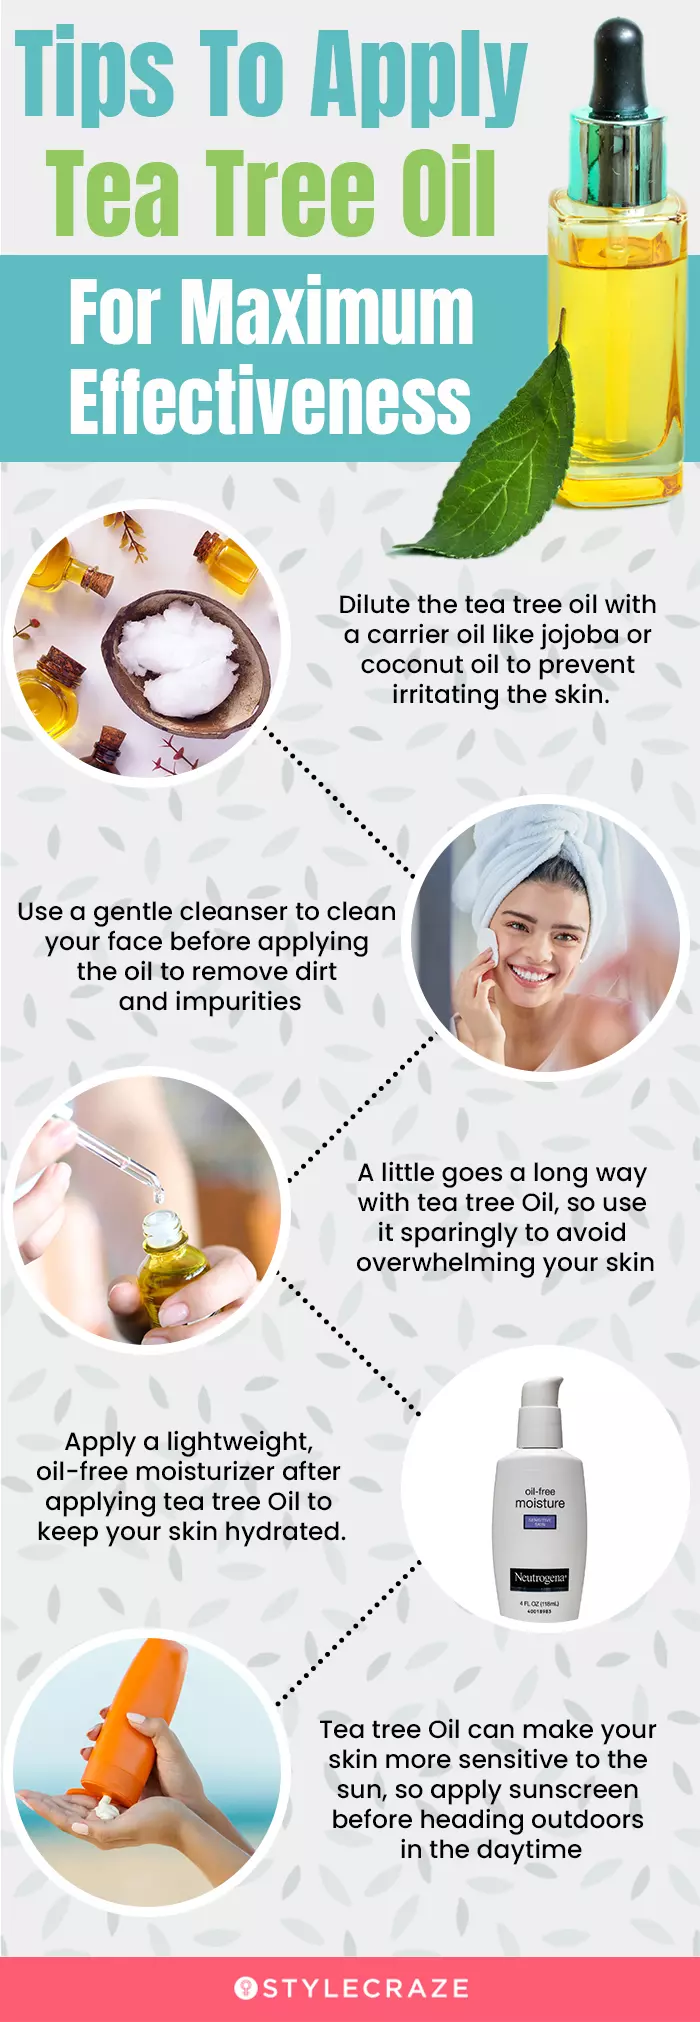 Tips To Apply Tea Tree Oil (infographic)